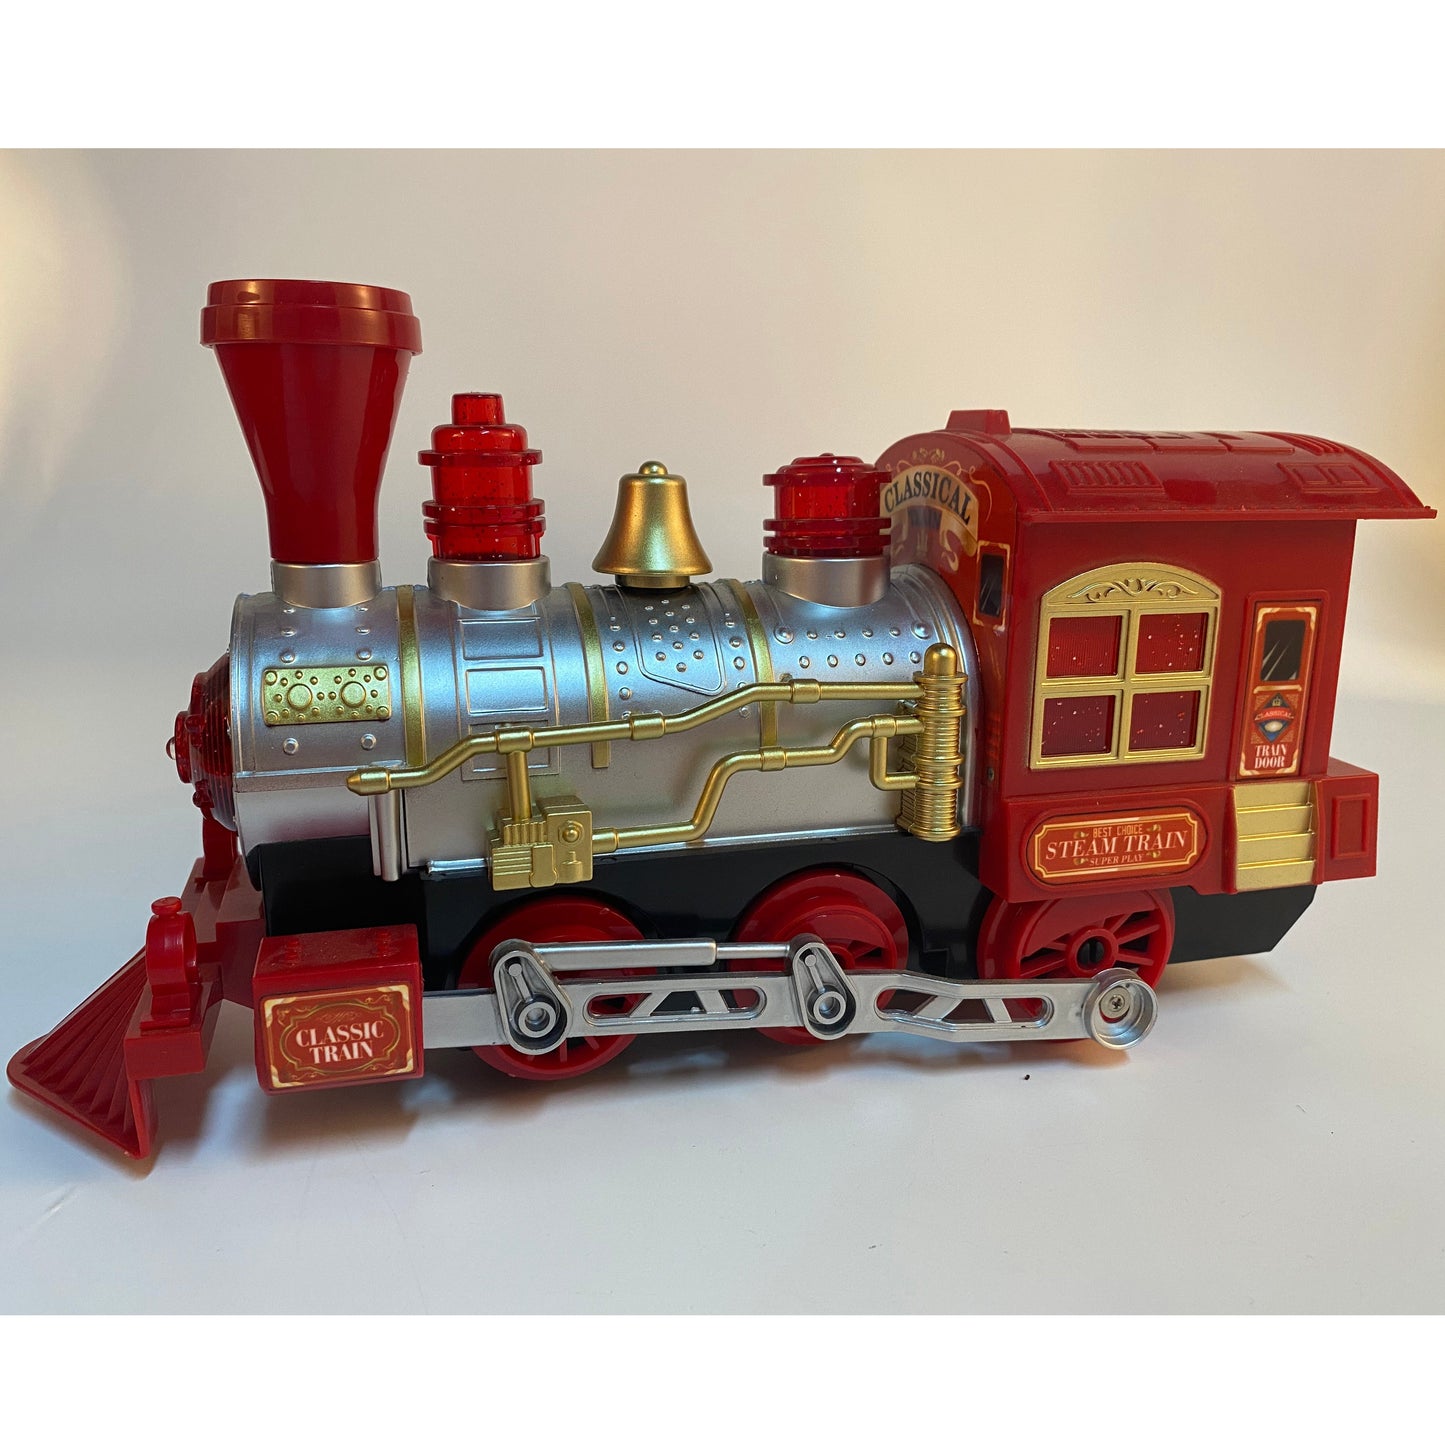 Starfun Learning & Education Toys Steam Train for Children's Birthday Gifts